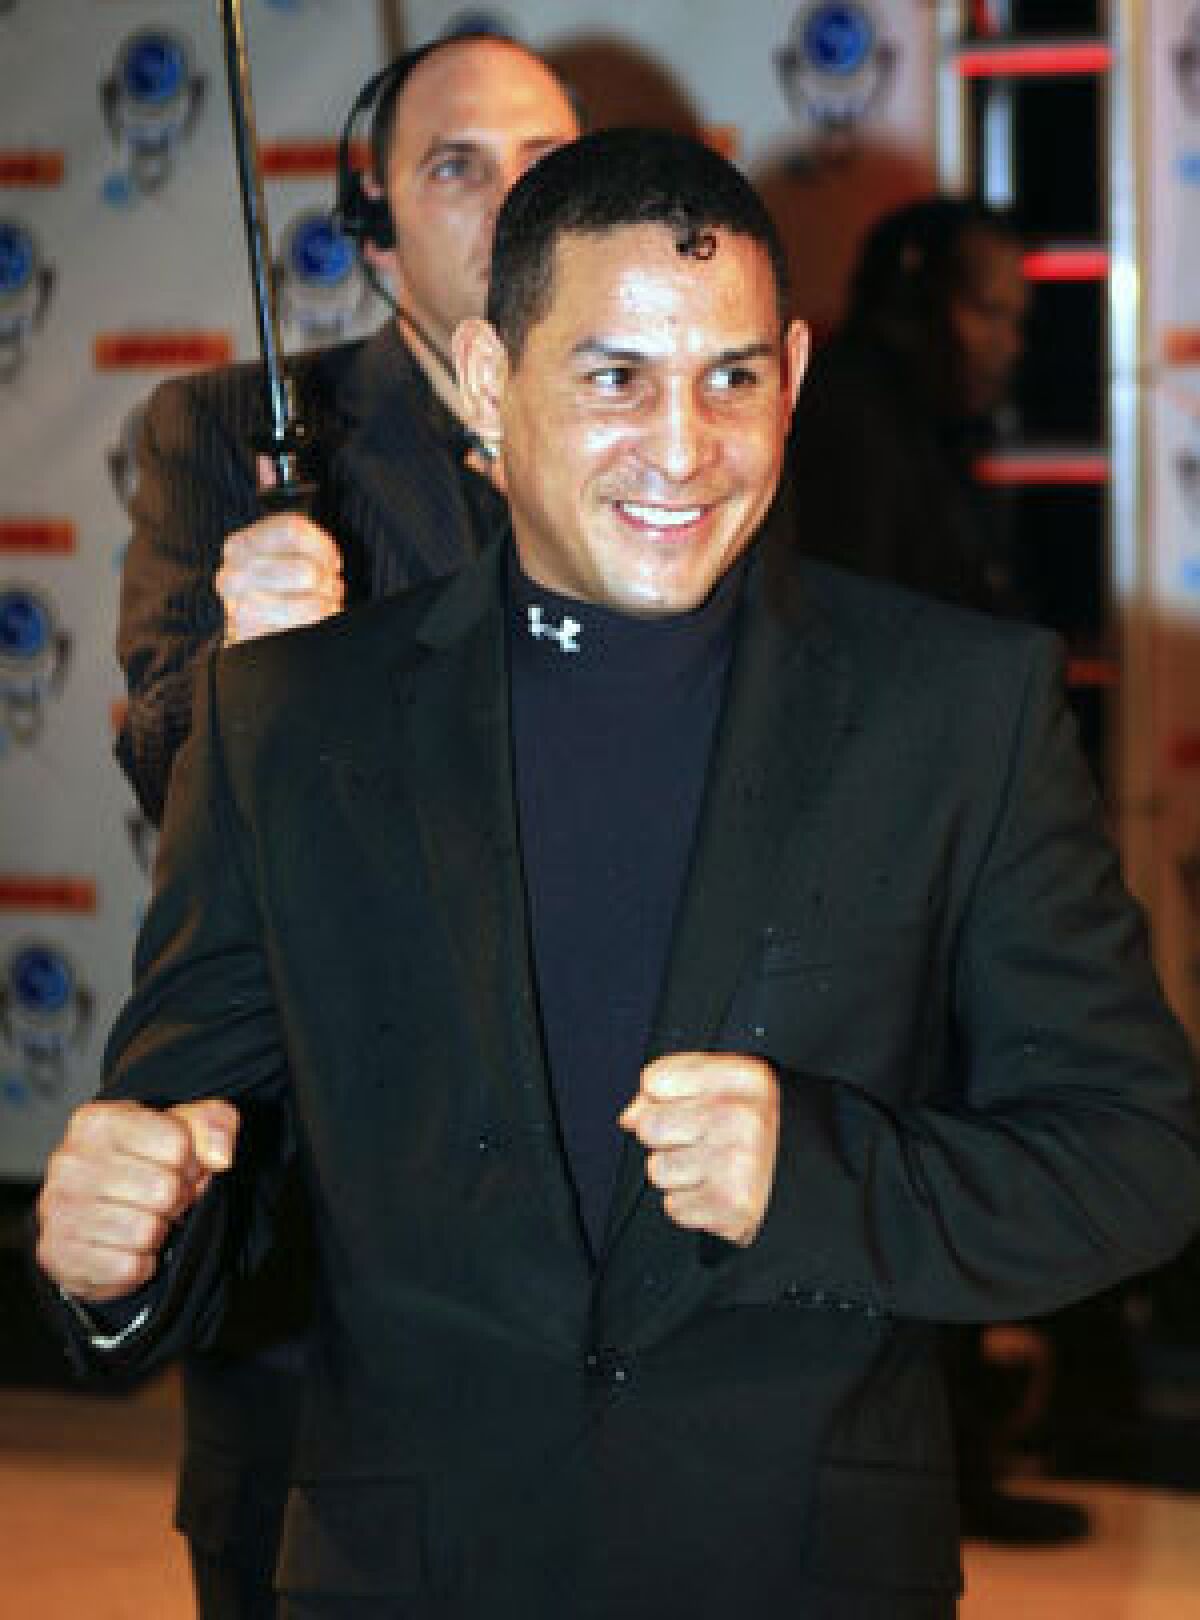 Hector "Macho" Camacho arrives for an event in Miami Beach in 2006.